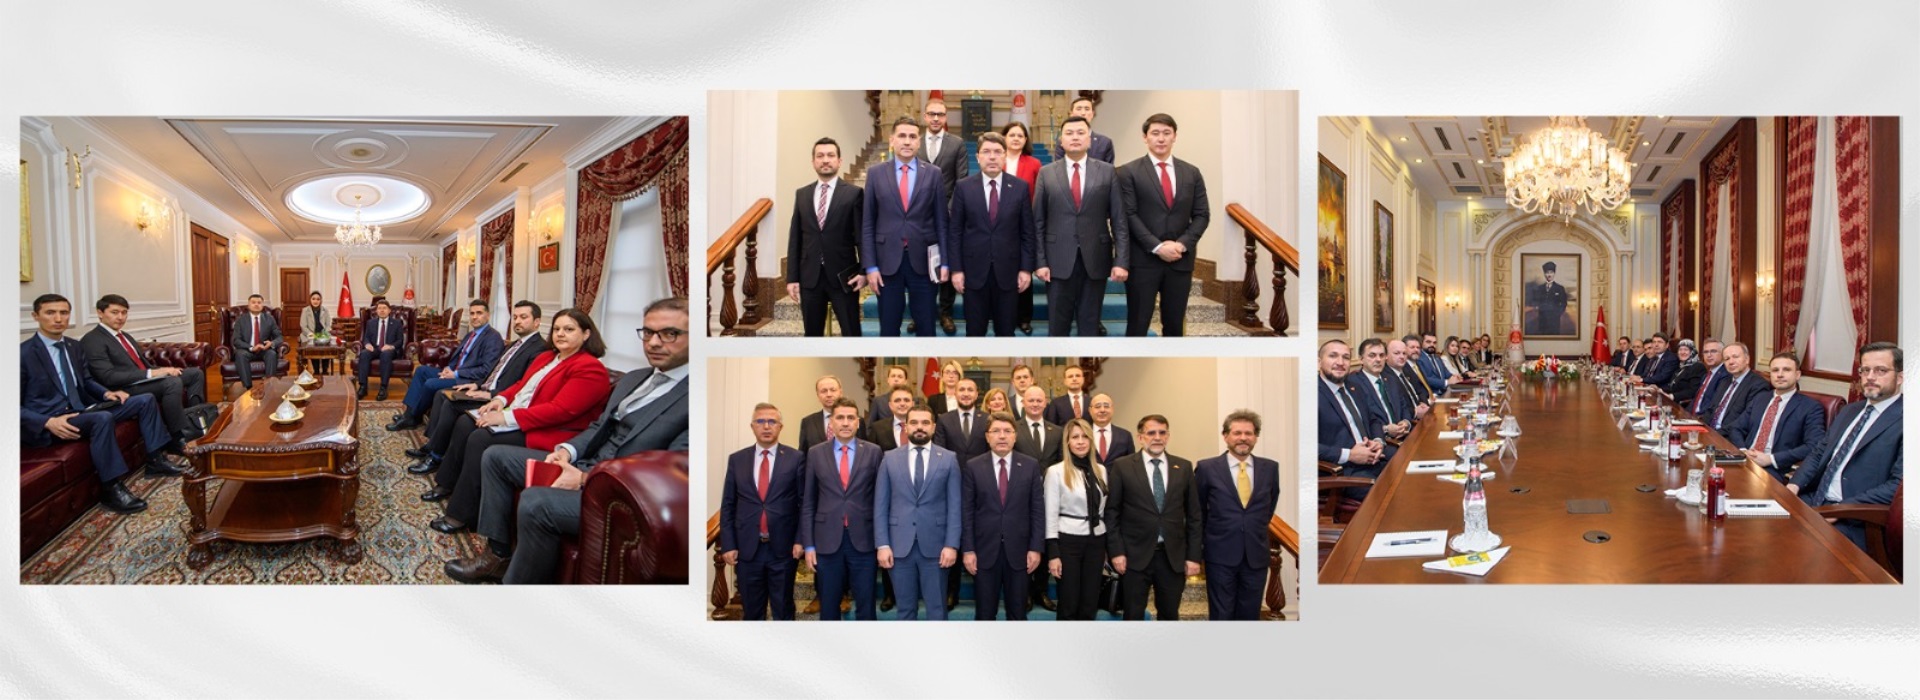 MINISTER TUNÇ MET WITH JUSTICE MINISTERS OF NORTH MACEDONIA AND KYRGYZSTAN Duyuru Görseli